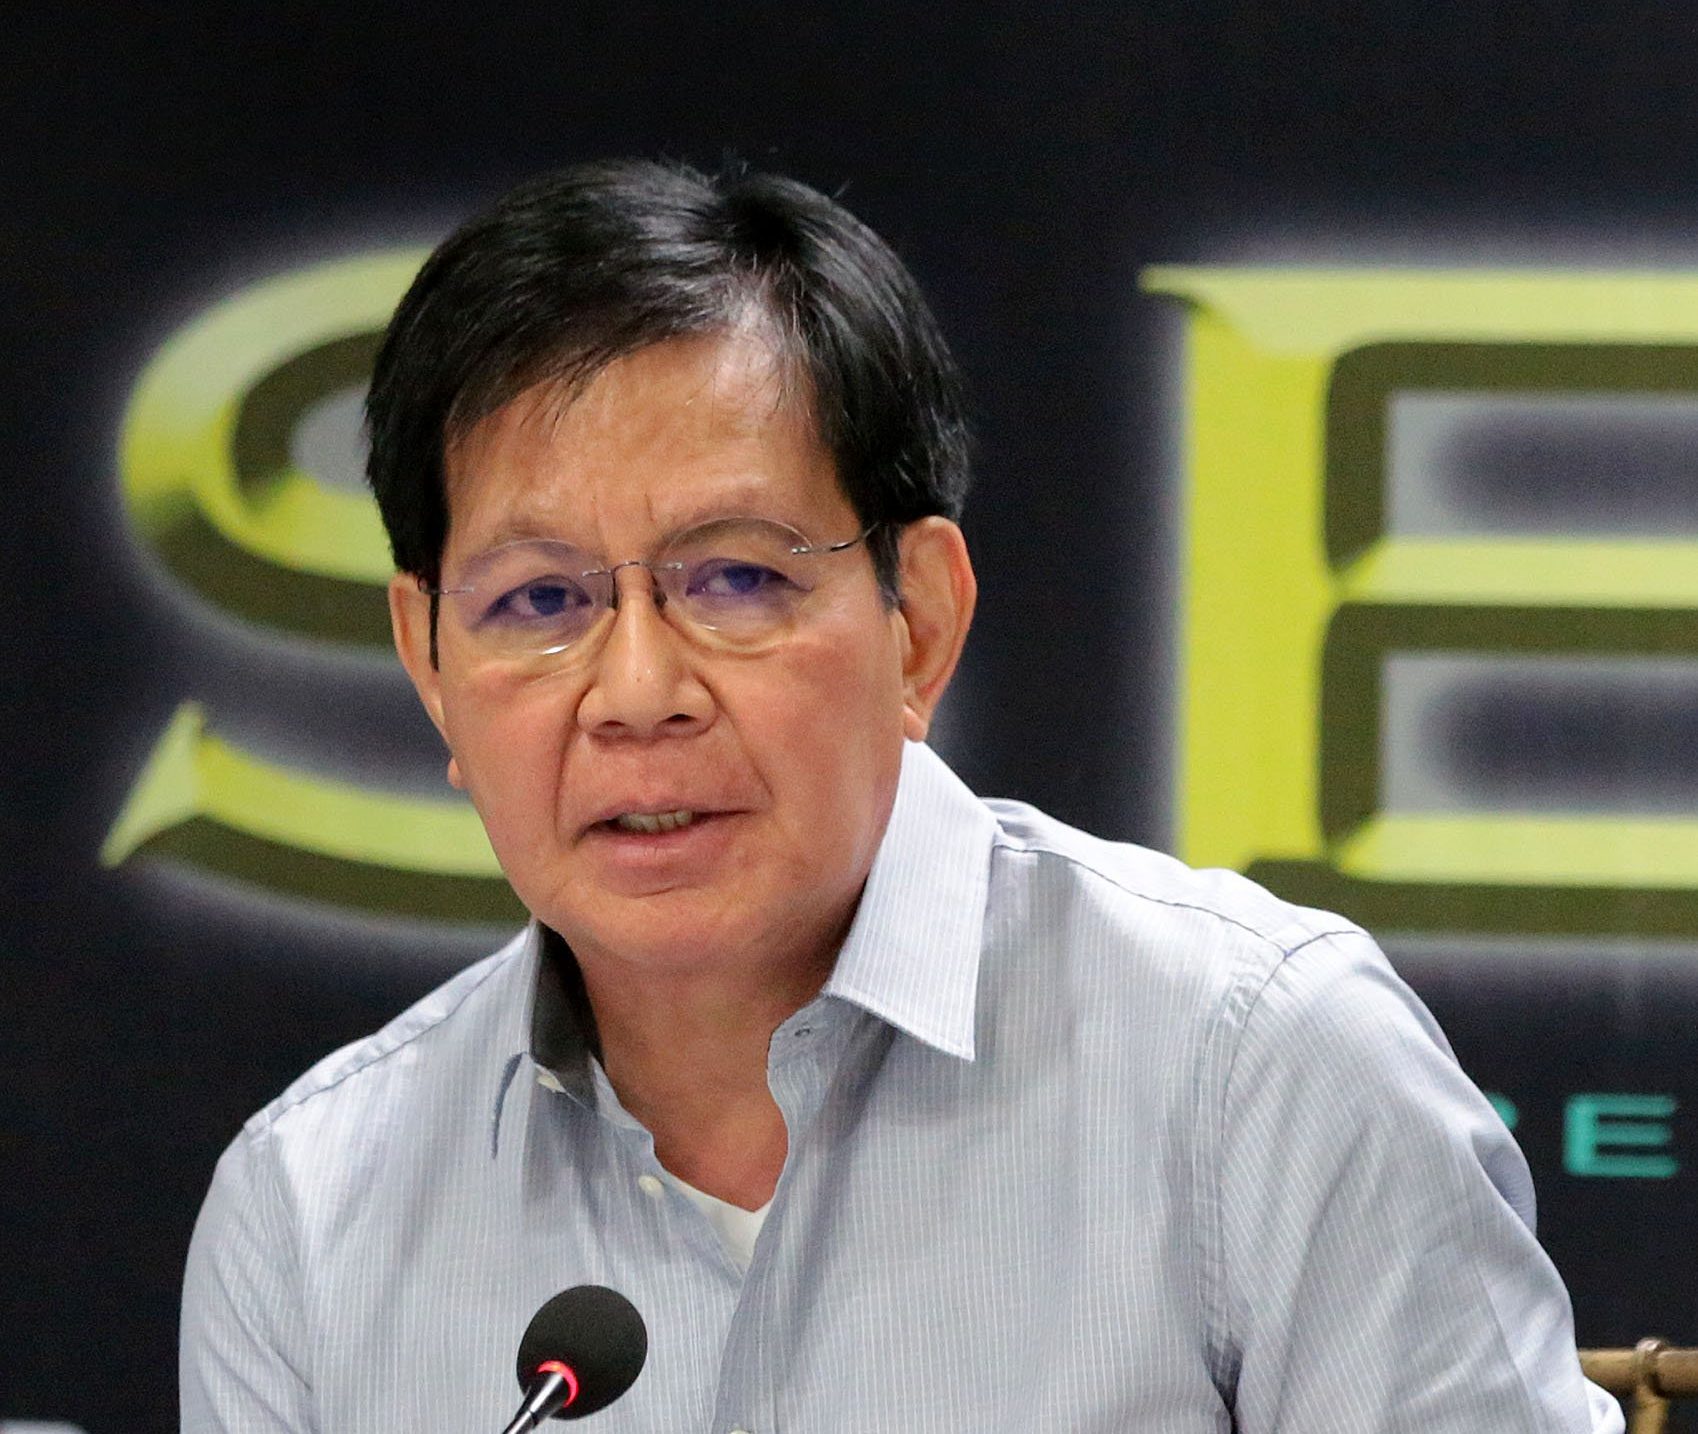 House leader calls Lacson hypocrite for pork insertion claims